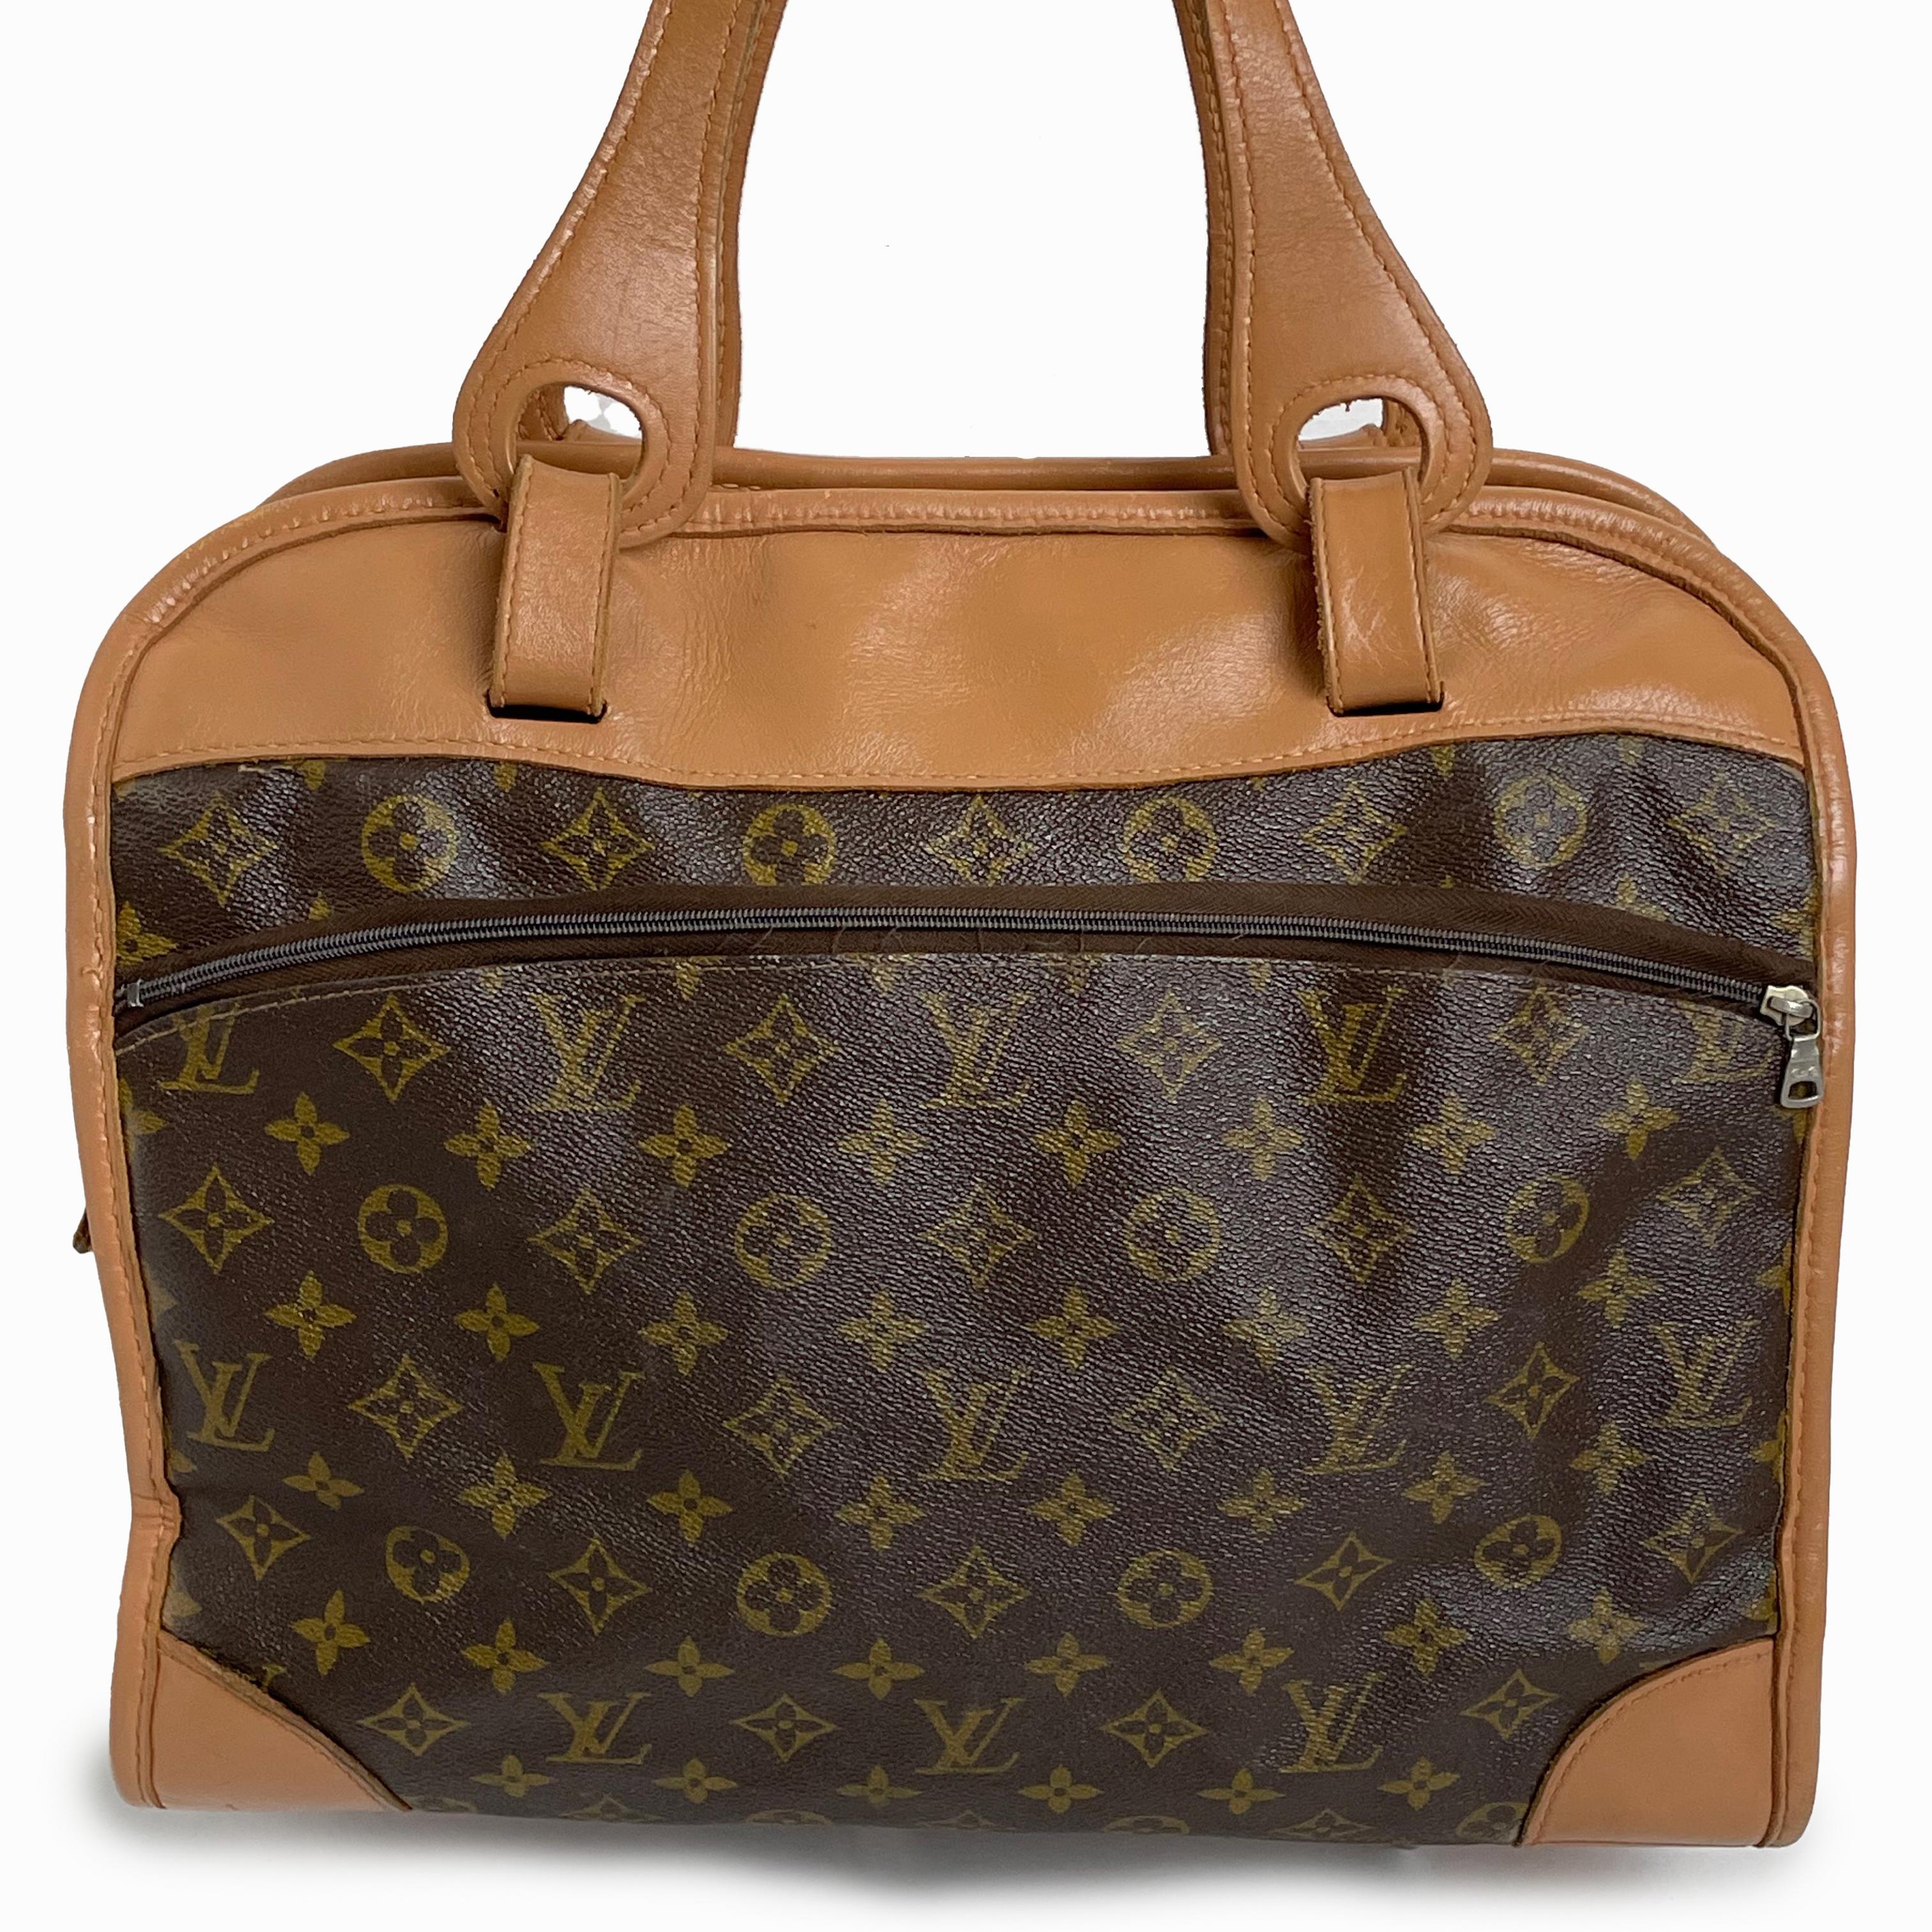 Louis Vuitton Tote Bag Travel Carry On French Luggage Co Saks 5th Ave Vintage  im Angebot 4